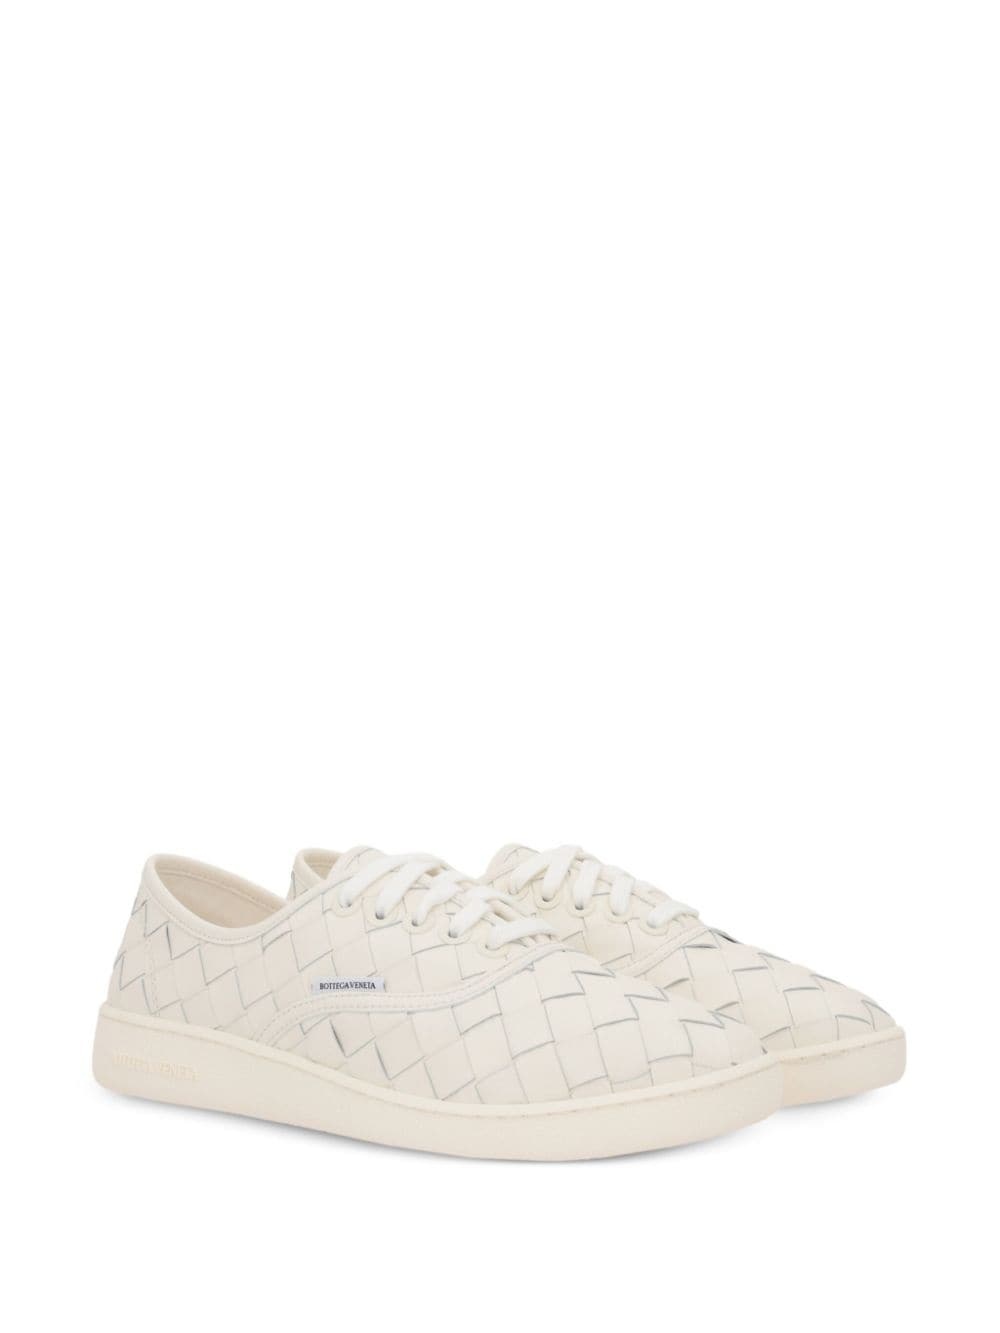 interwoven leather sneakers - 2